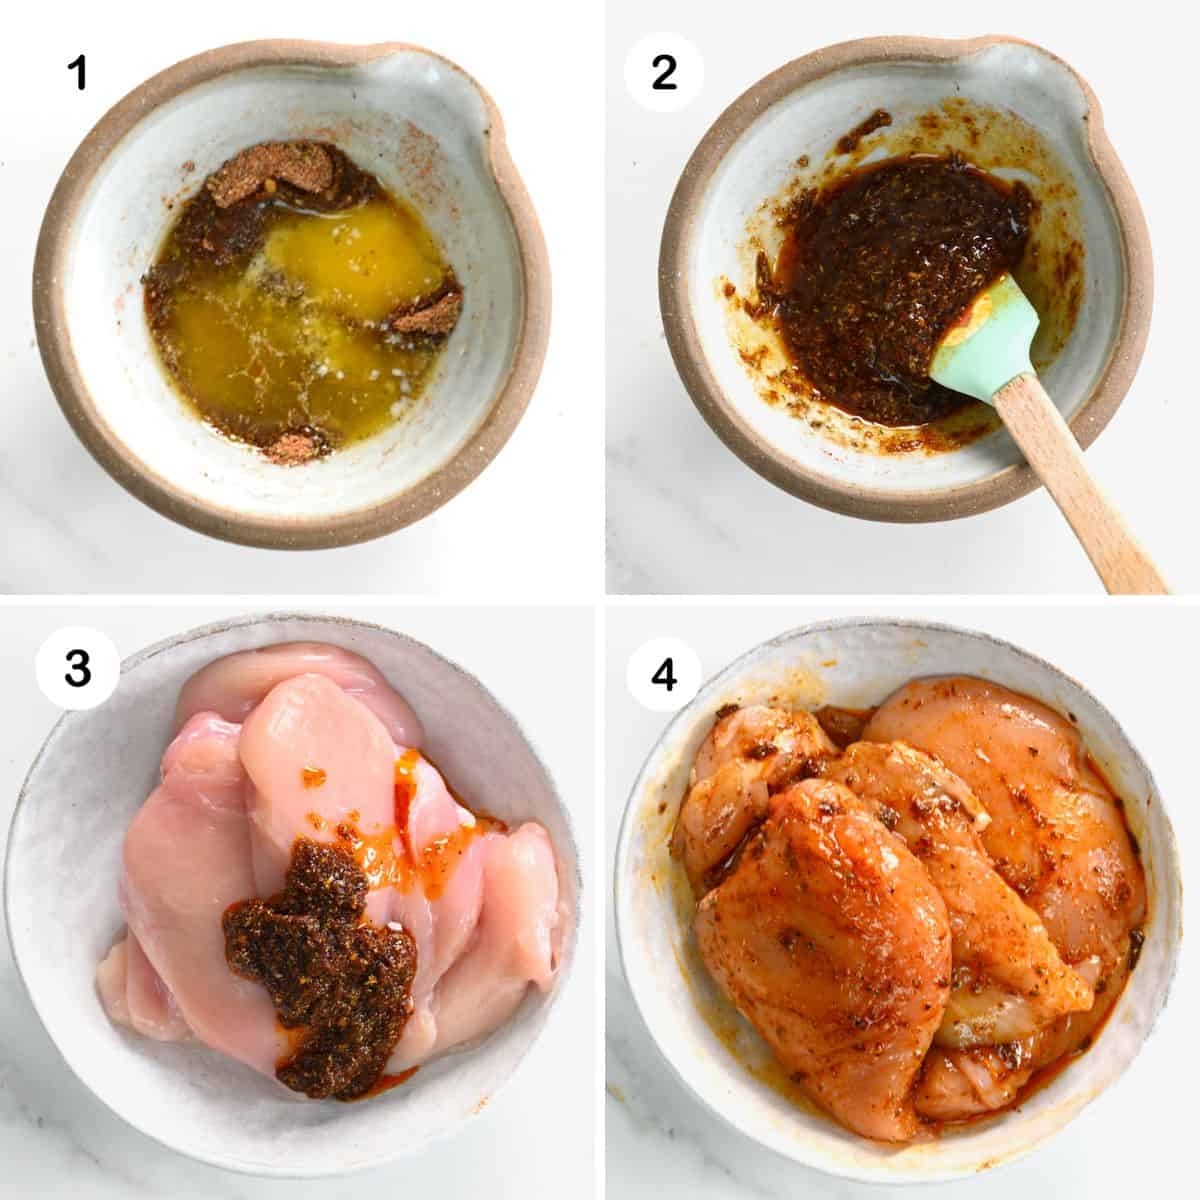 Steps for marinating chicken with spices